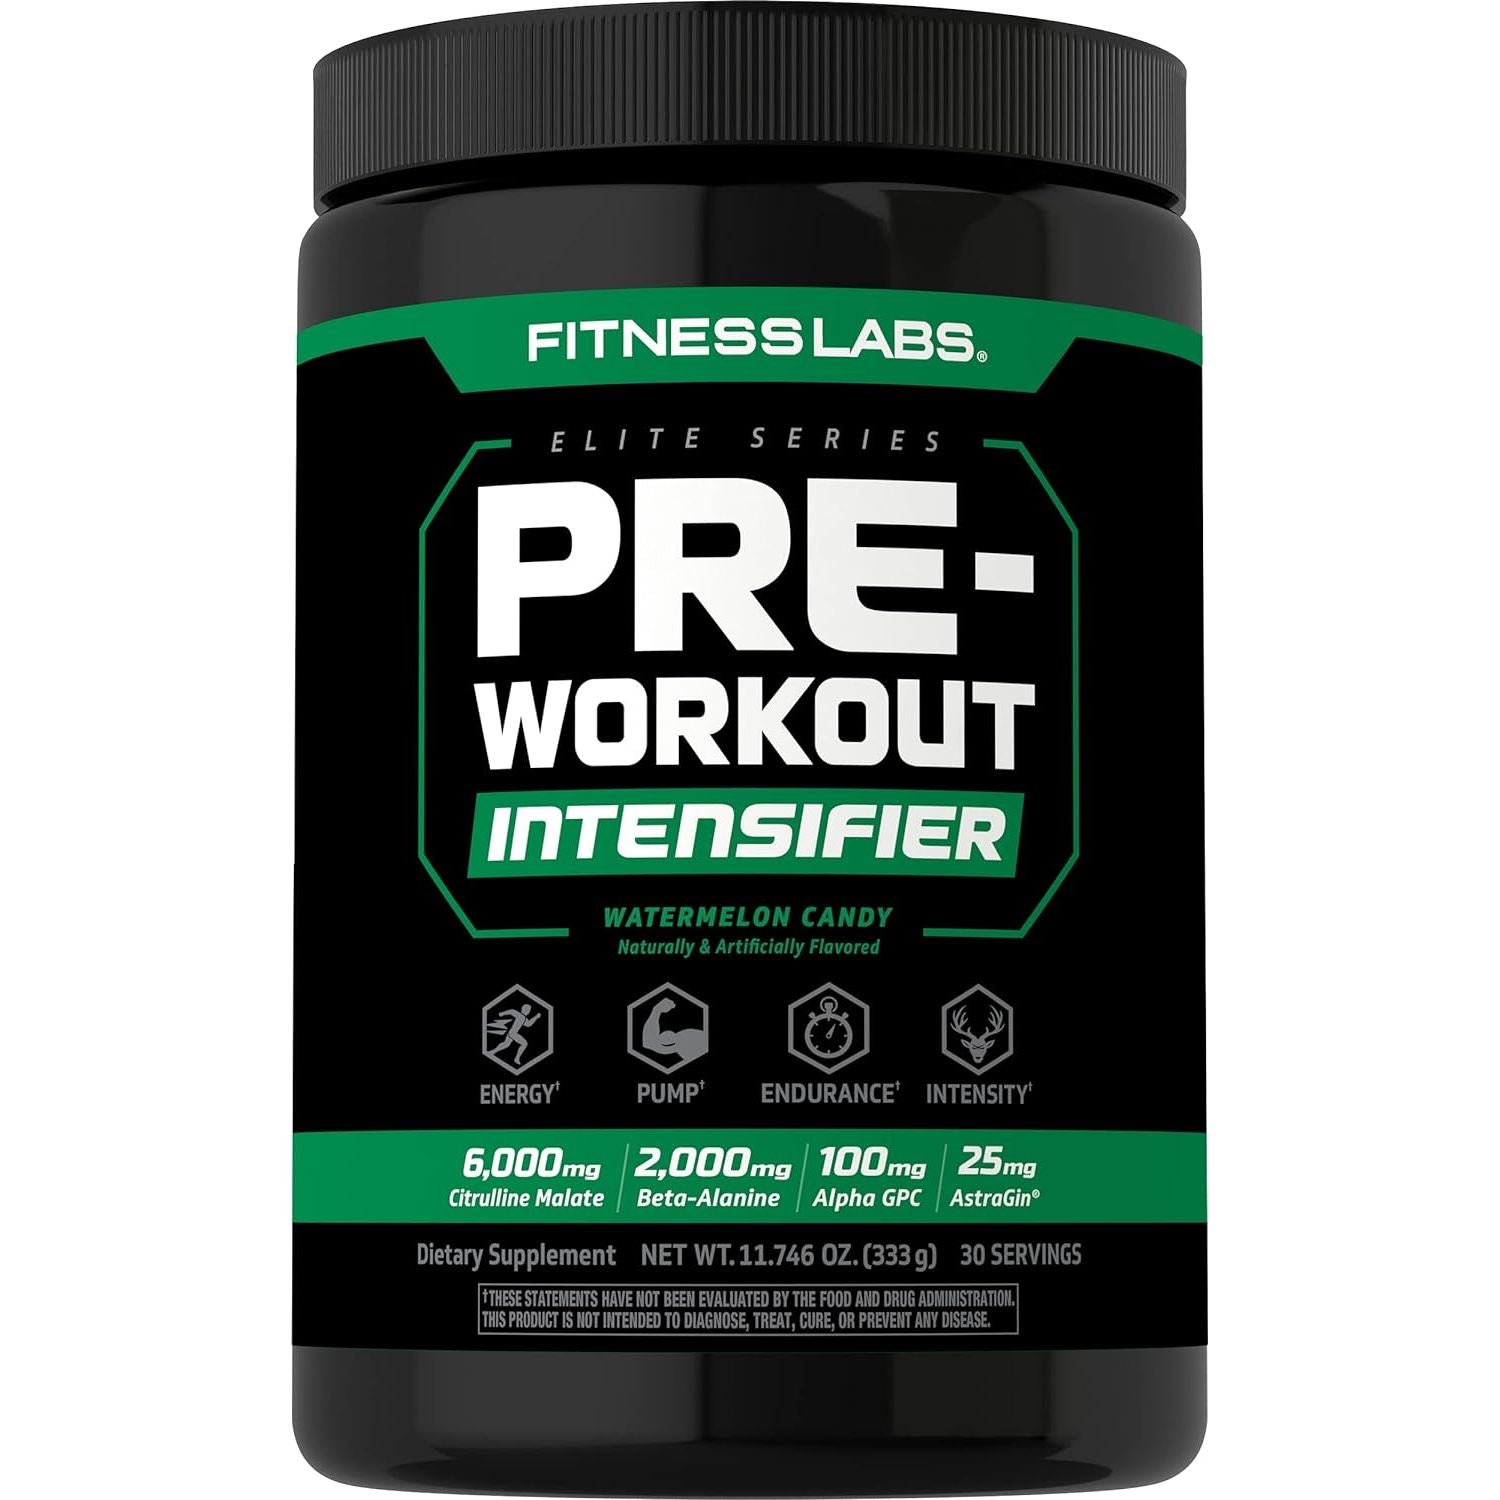 Fitness Labs Pre Workout Powder  for Men and Women  Intensifier Supplement